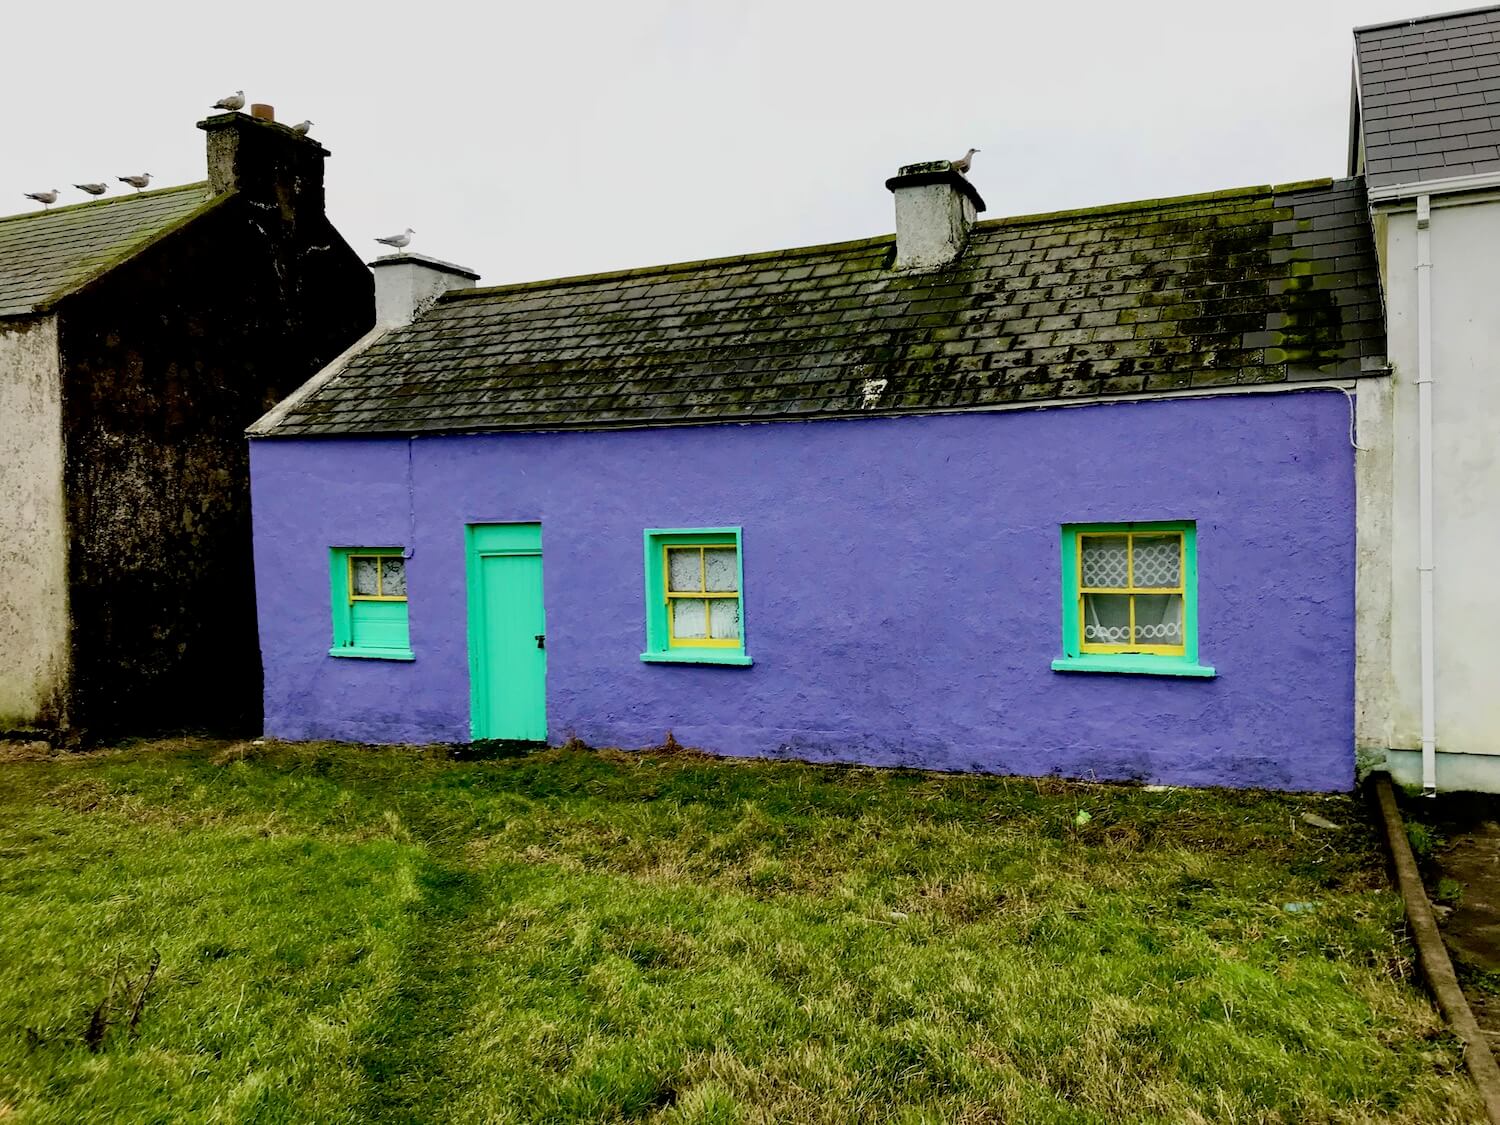 A home on Tory Island is bright purple in color with neon green borders to three windows and a door.  The grass is thick and green outside the house and seagulls perch on the chimneys above. 